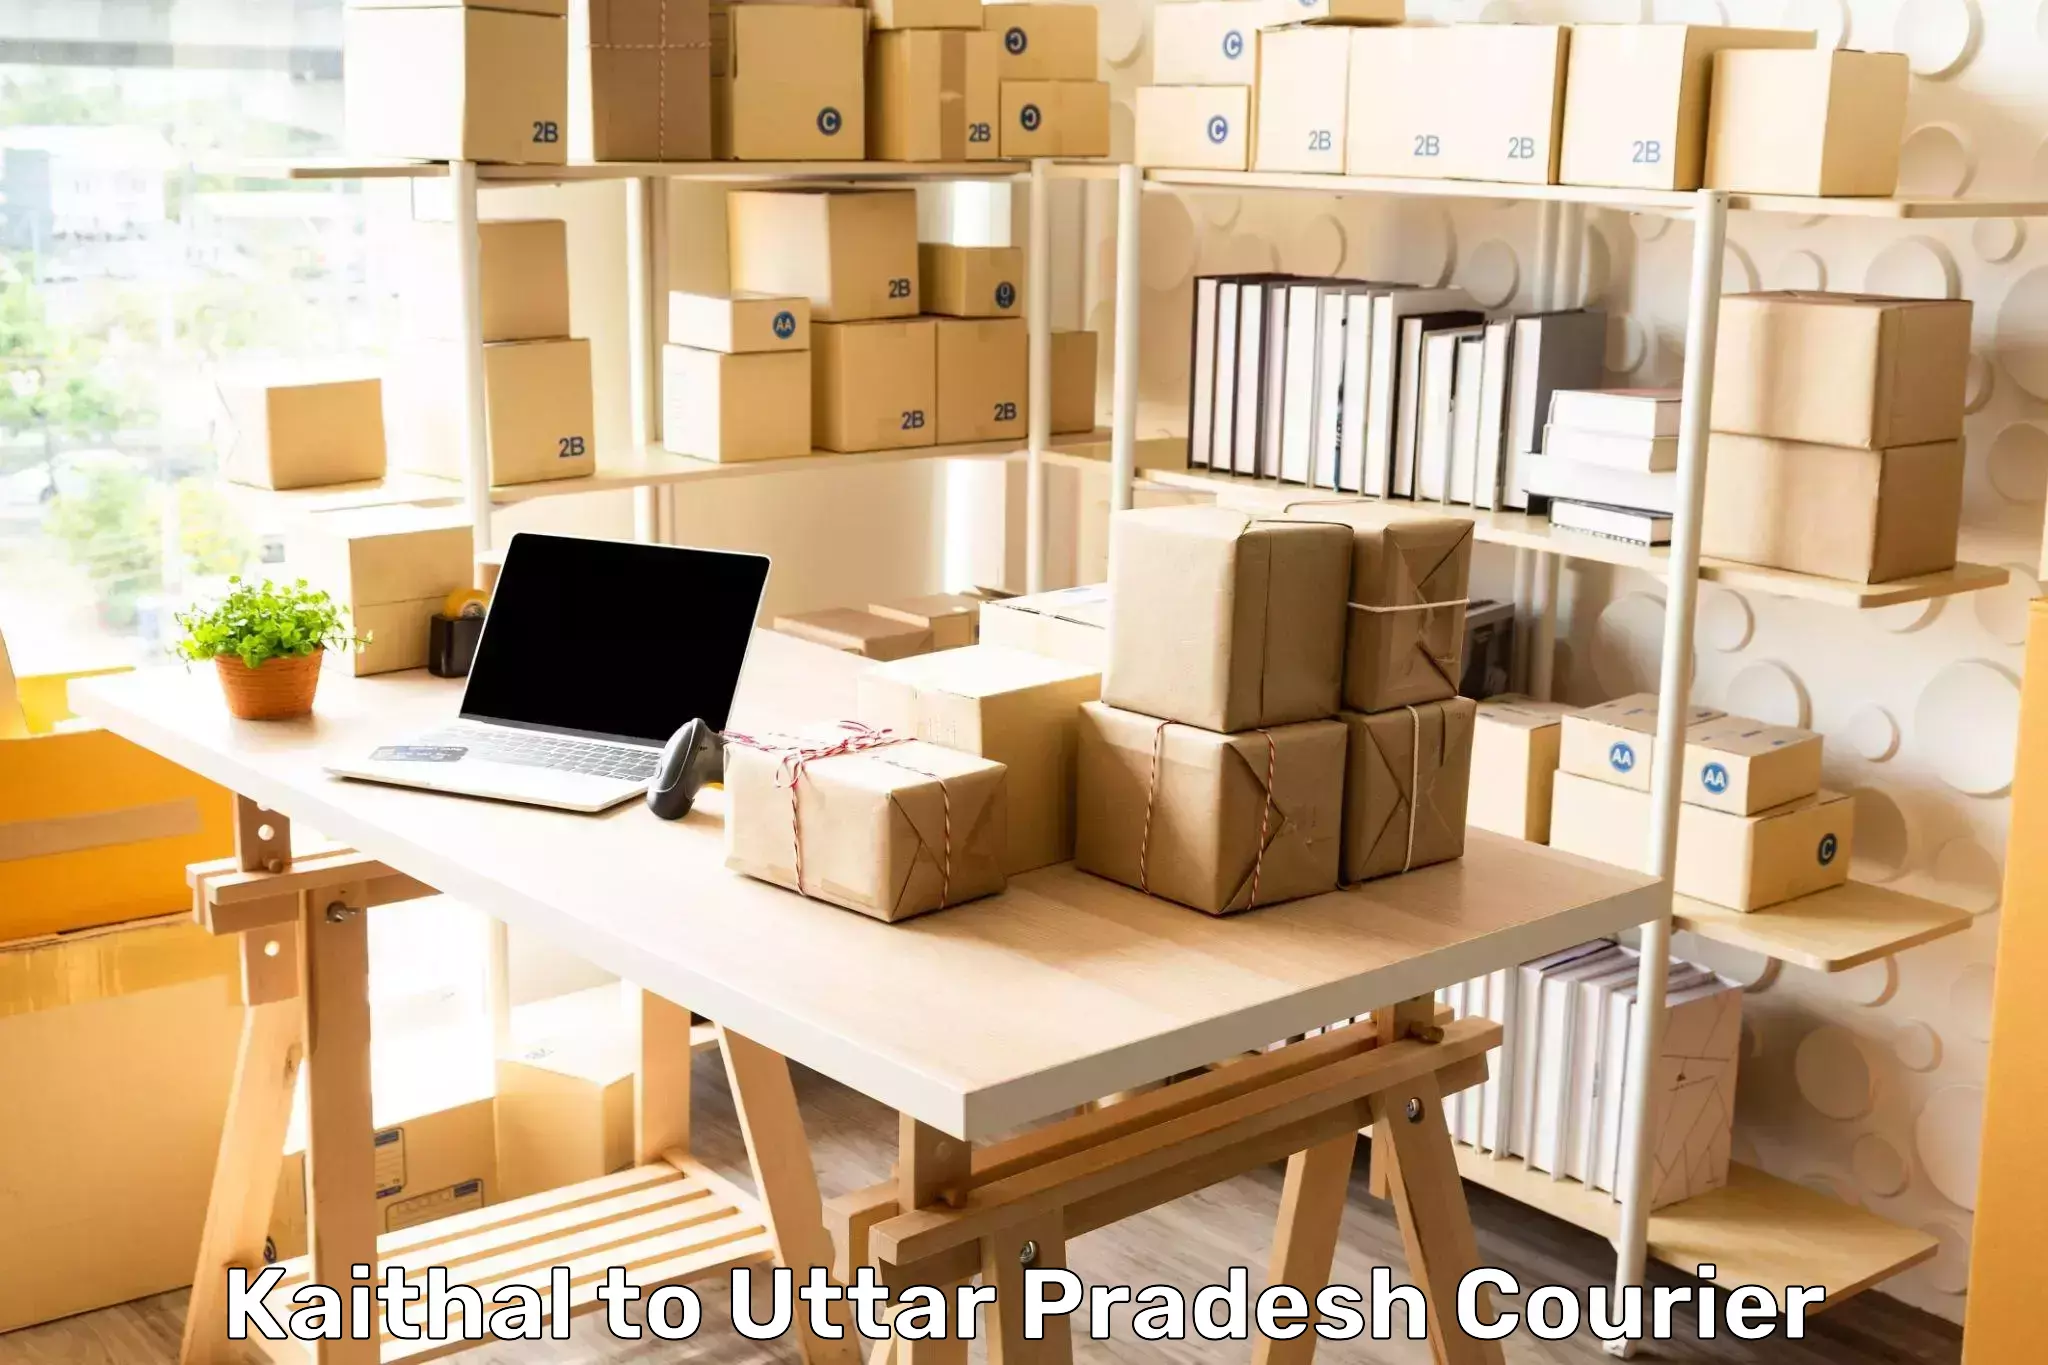 Return courier service Kaithal to Chitrakoot